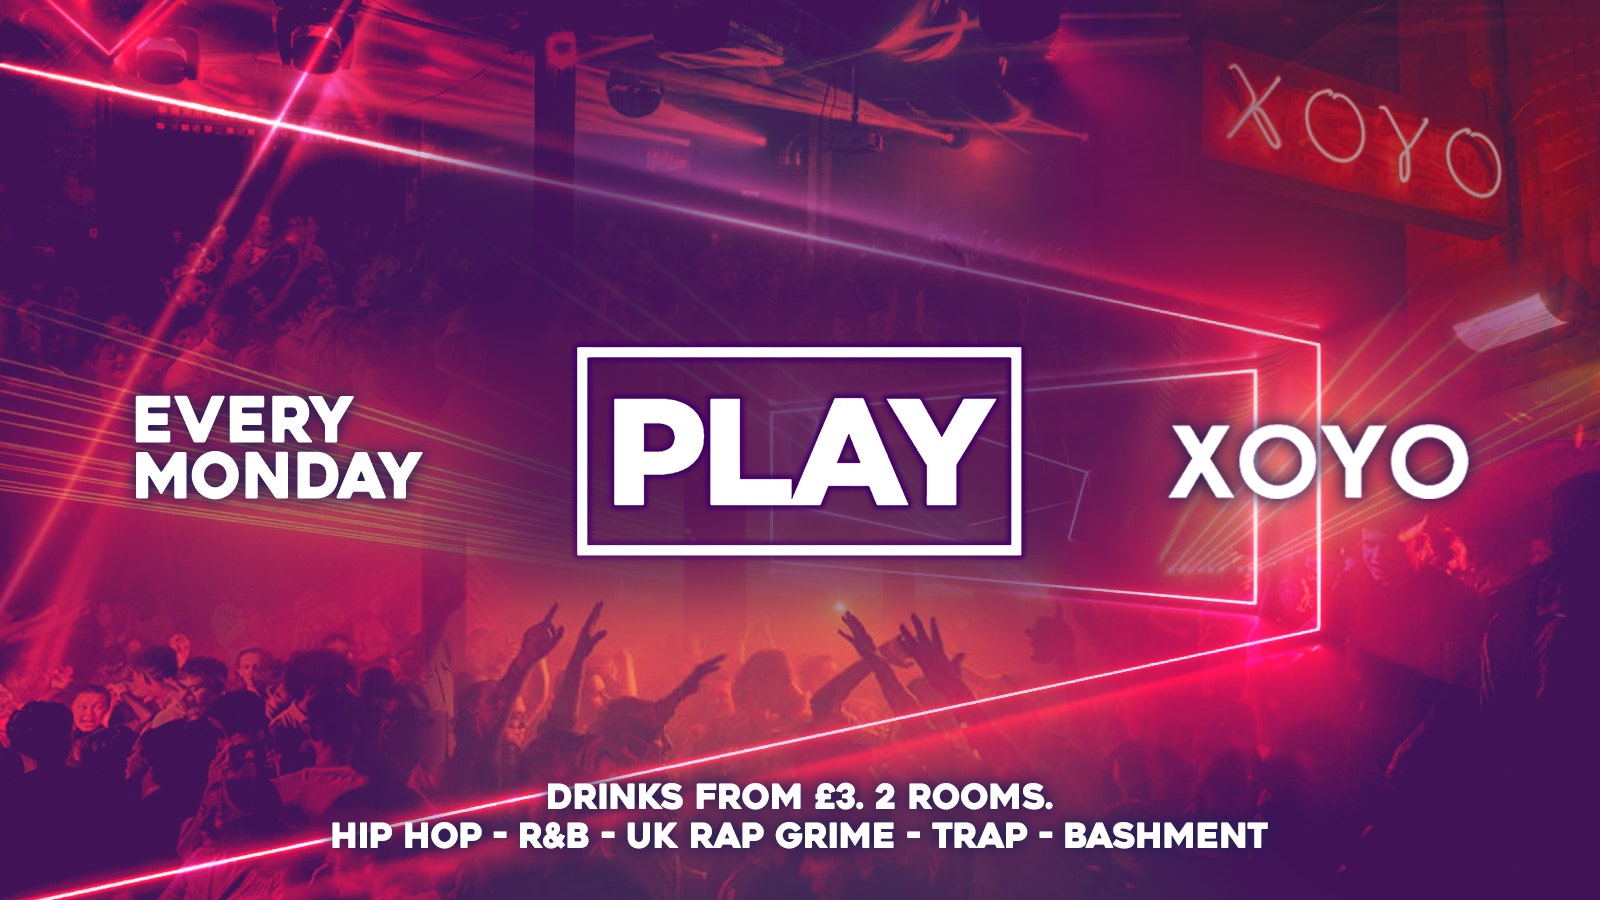 Play @ XOYO – The Biggest Weekly Monday Student Night in London! – 25th July 2022 🔥